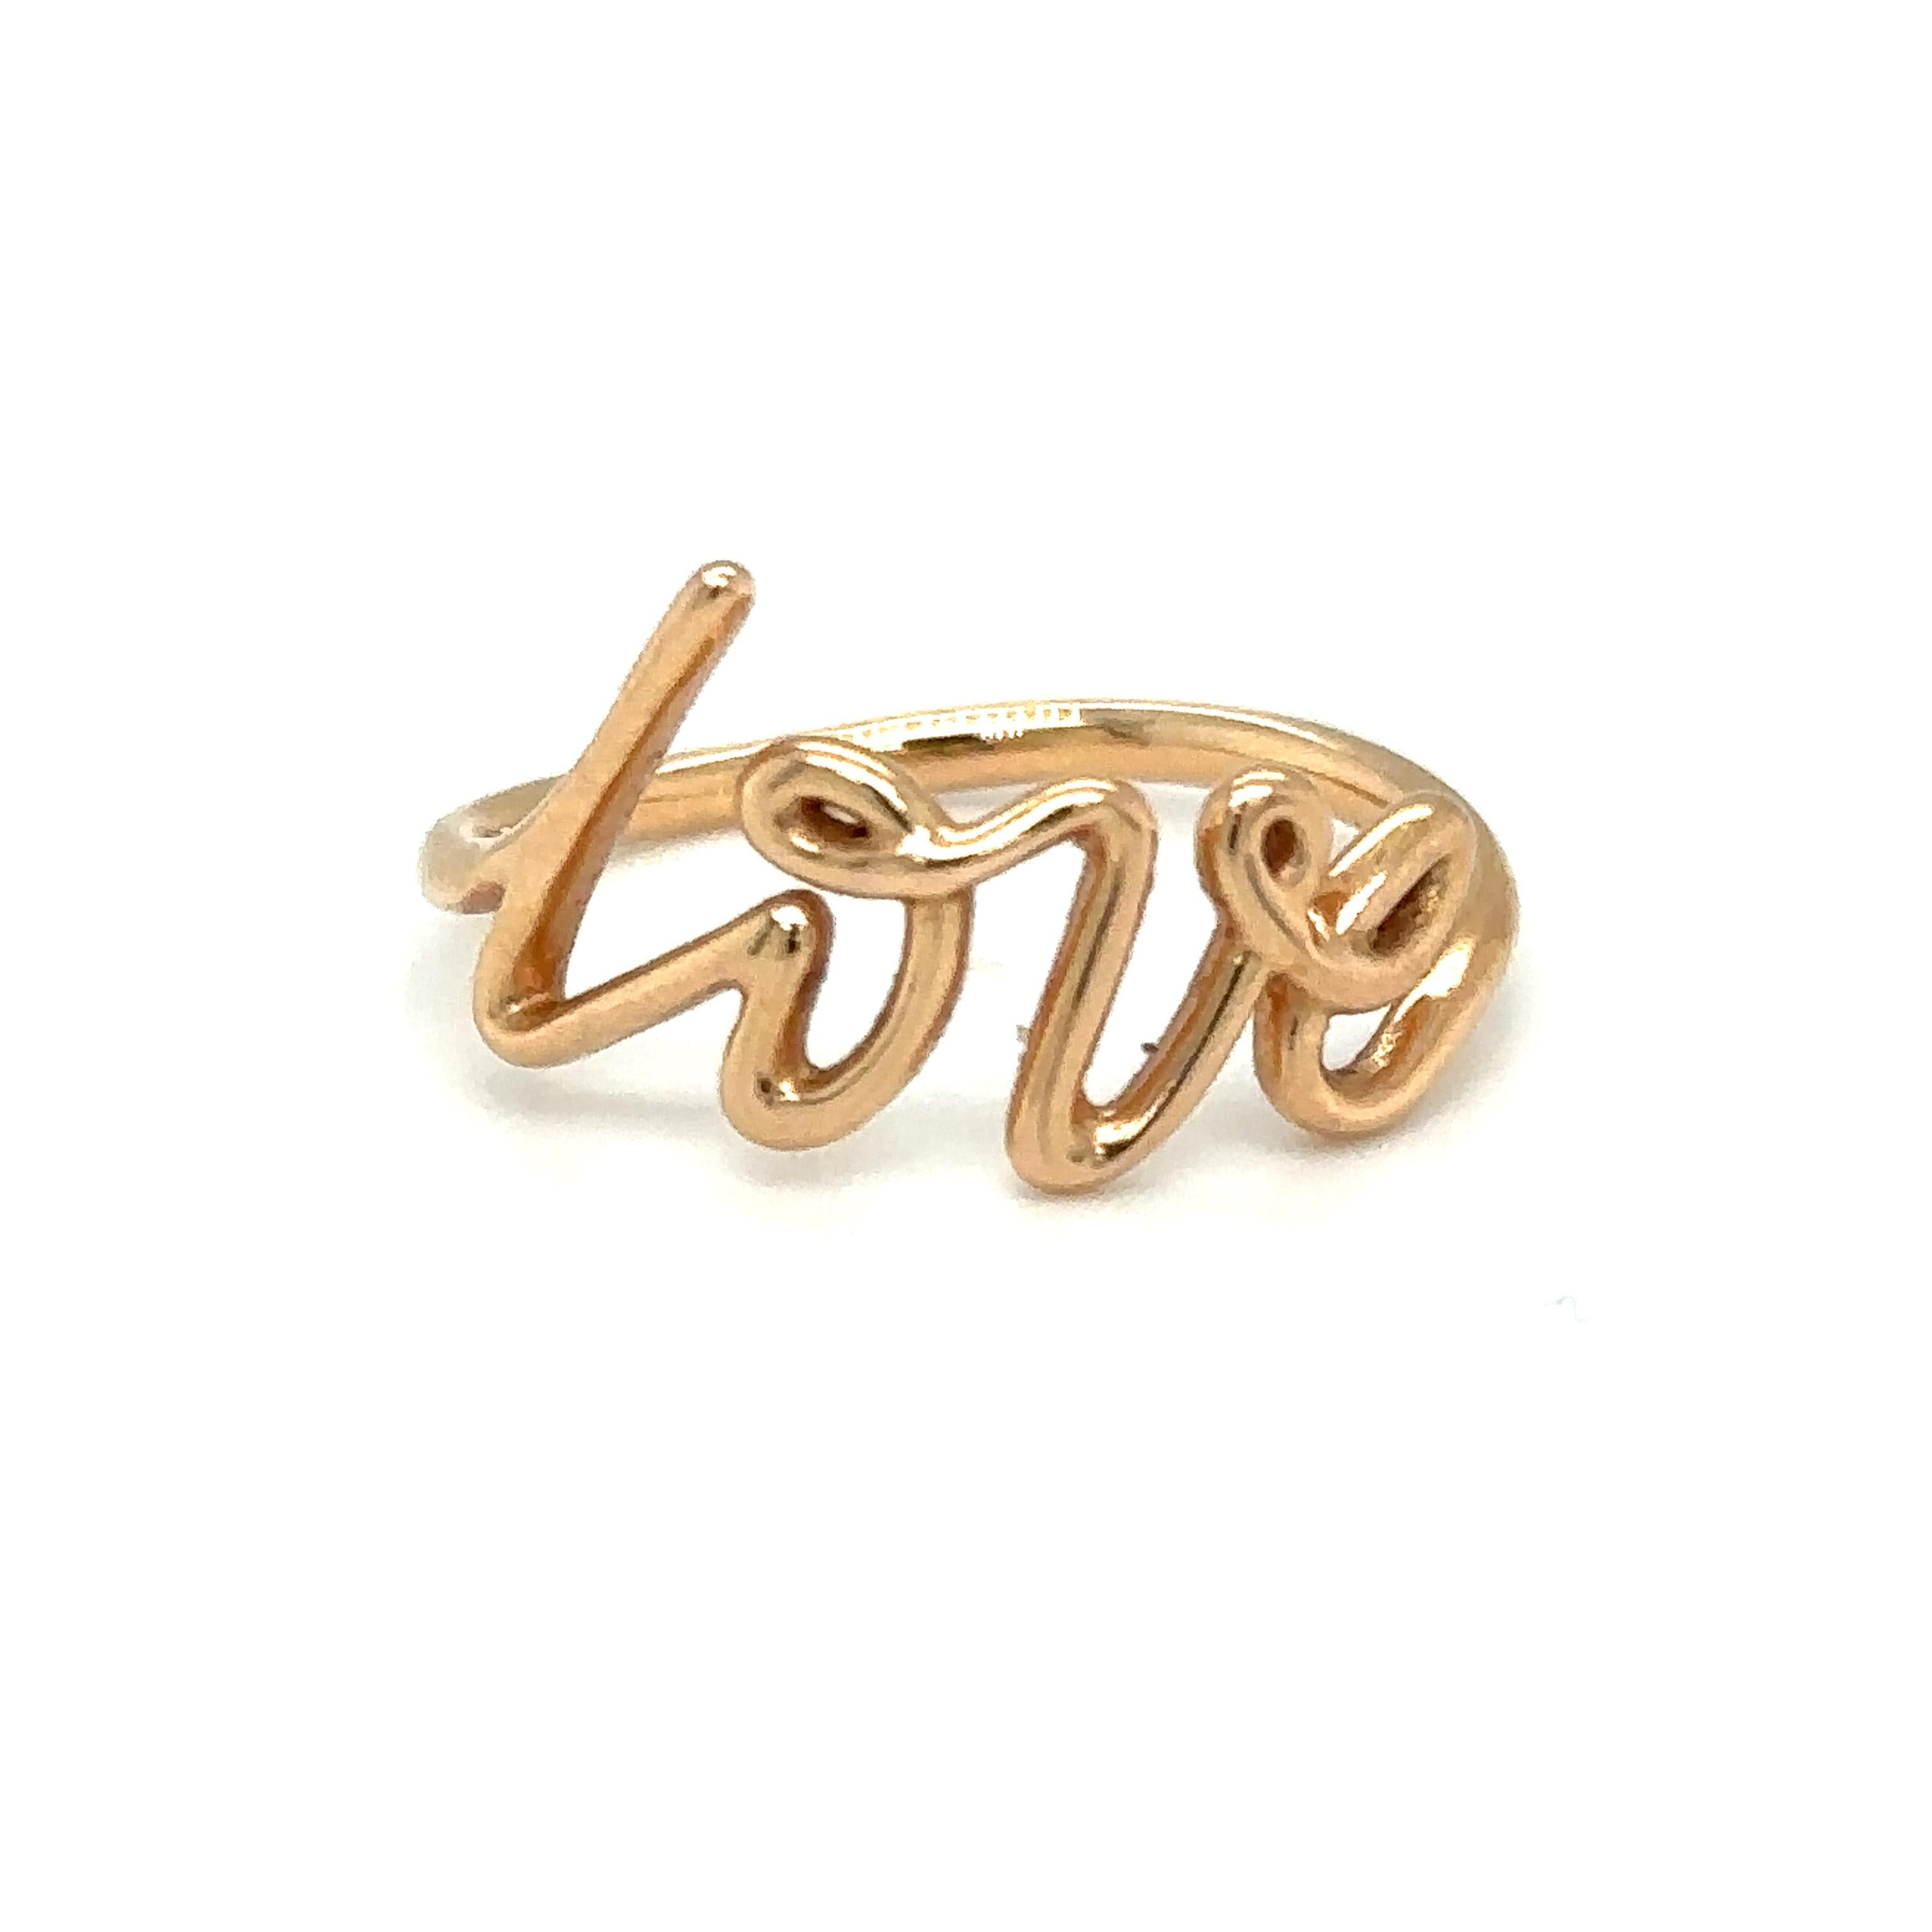 Item Details: This ring by Paloma Picasso for Tiffany & Co. has a simple 